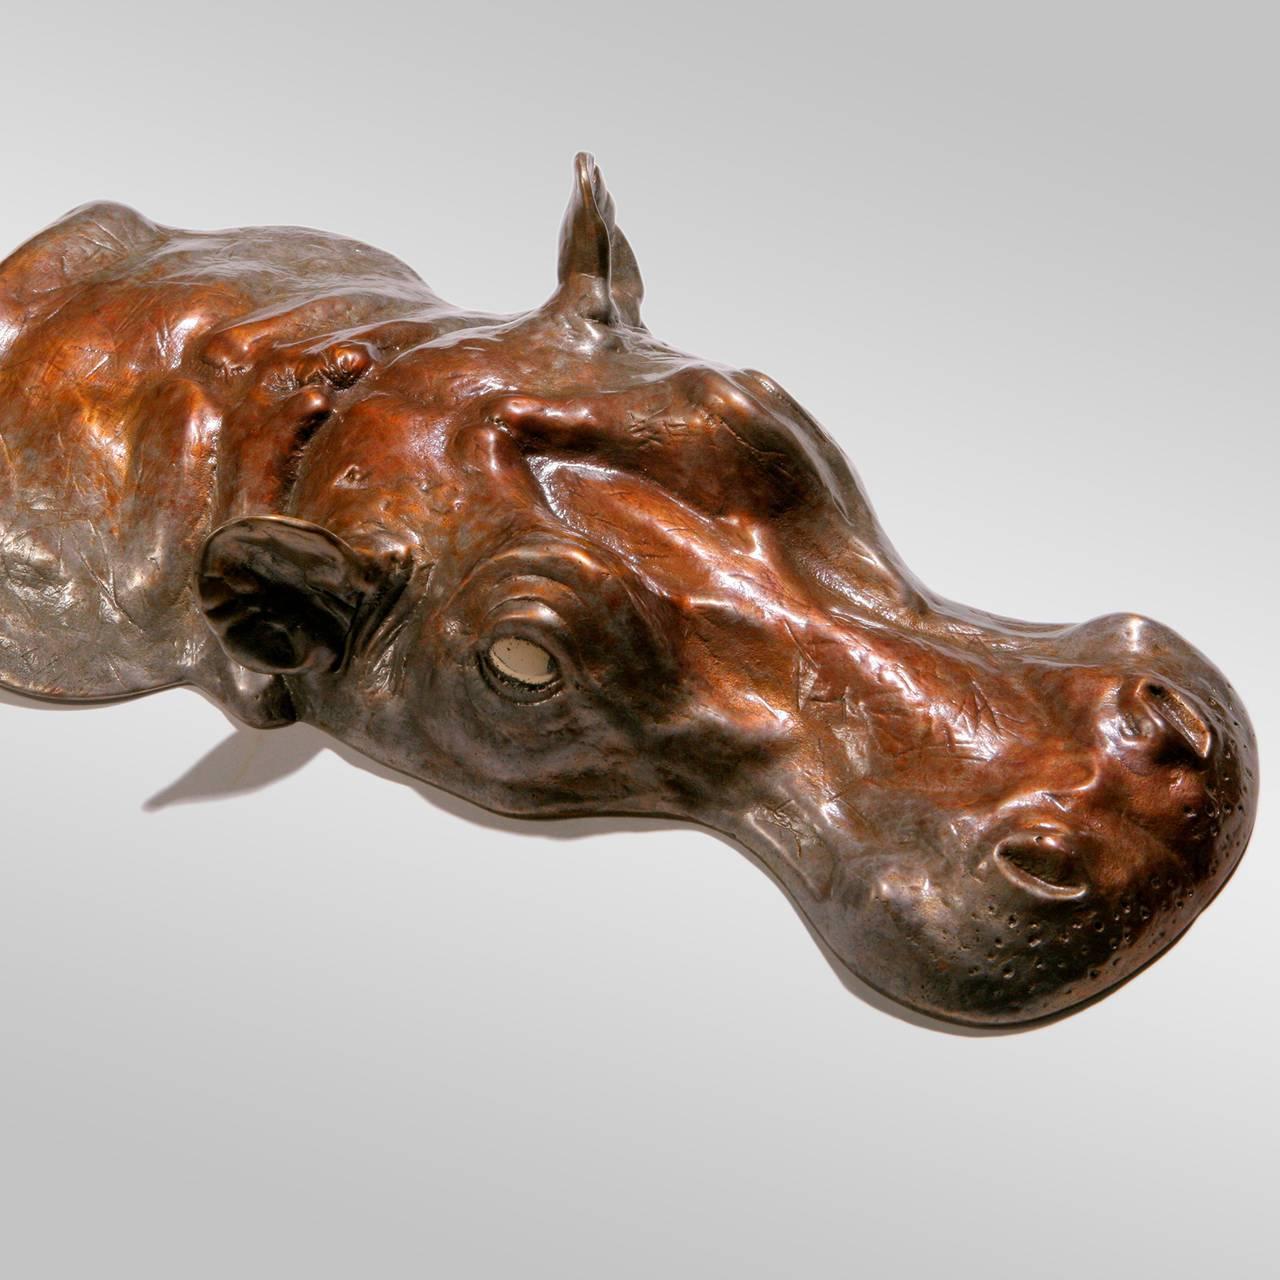 Small cast bronze hippopotamus sculpture with hand-patinated finish. This unique two-piece art object, signed and dated by the artist, can be displayed on a table or on the floor. Larger size also available.